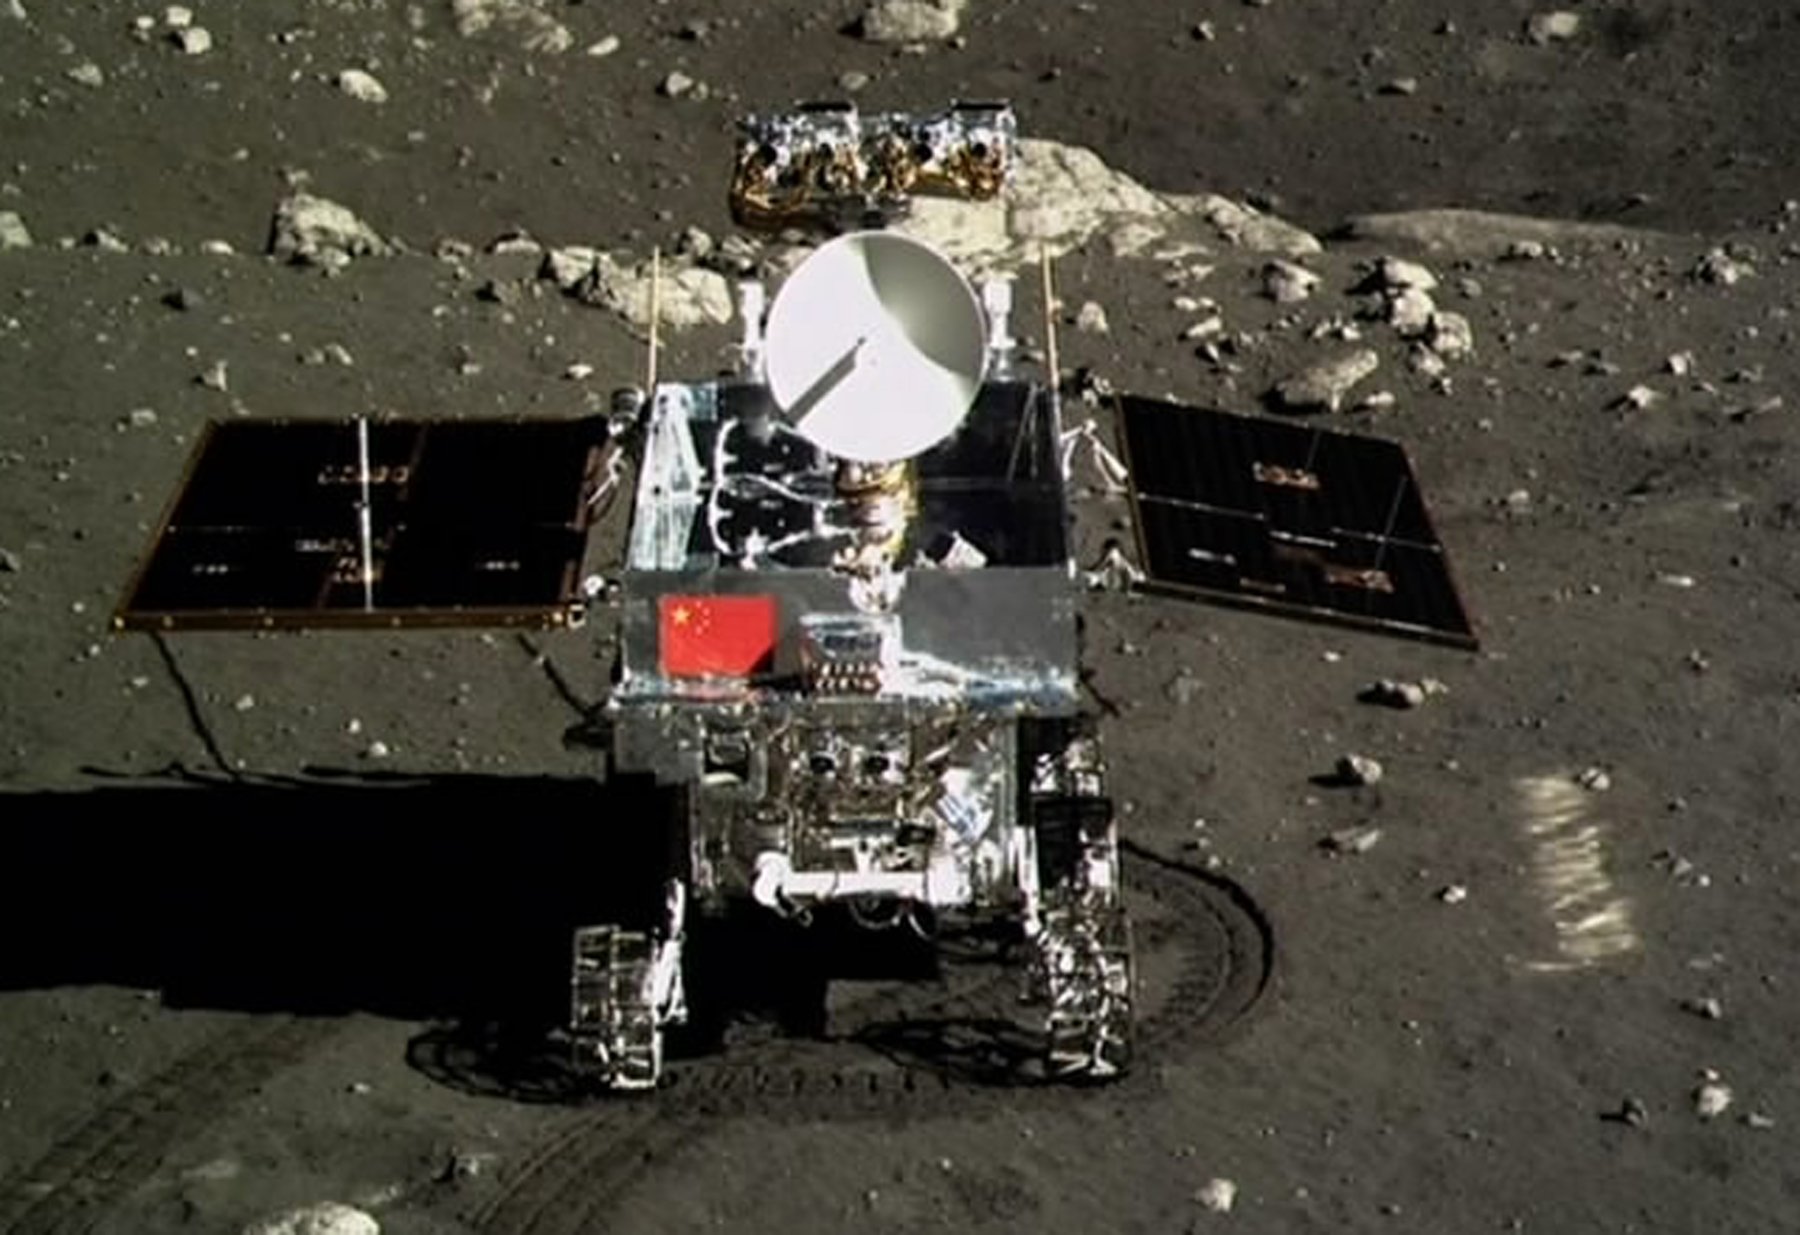 The national flag is clearly visible on the Yutu moon rover in this photograph taken by the camera on the Chang'e-3. Photo: Xinhua